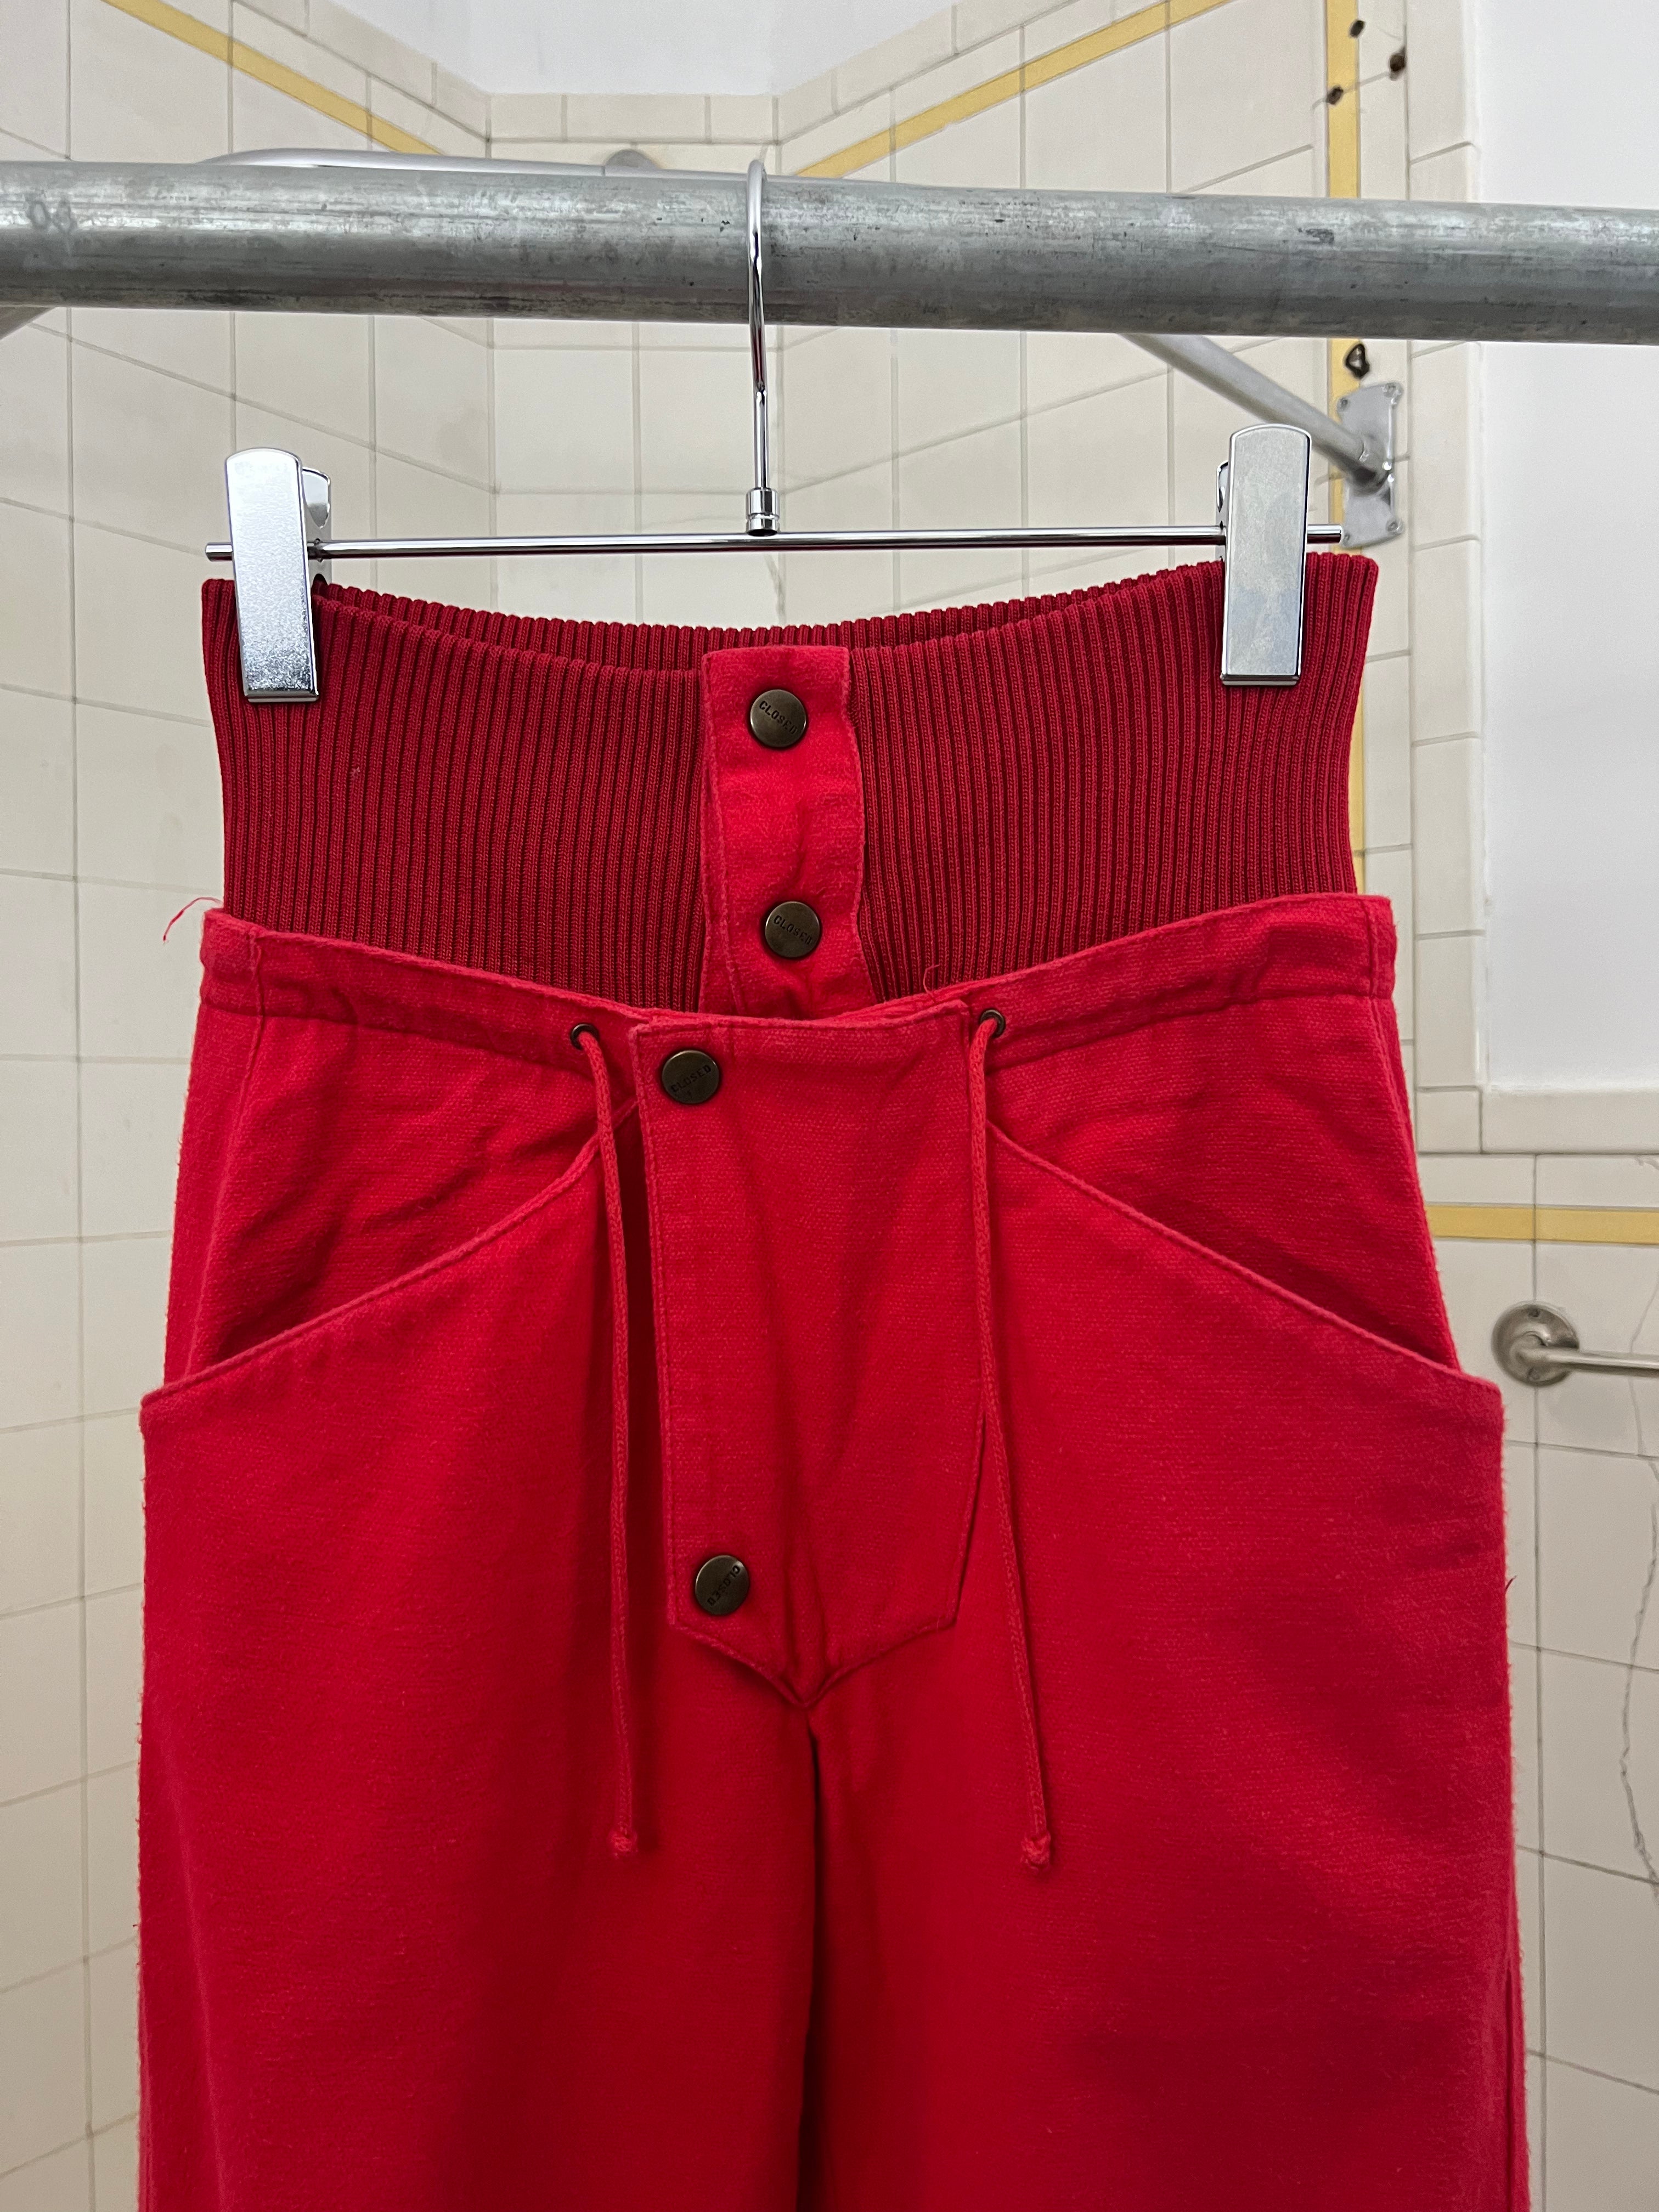 1980s Marithe Francois Girbaud x Closed Canvas Riding Pants in Red - Size XXS